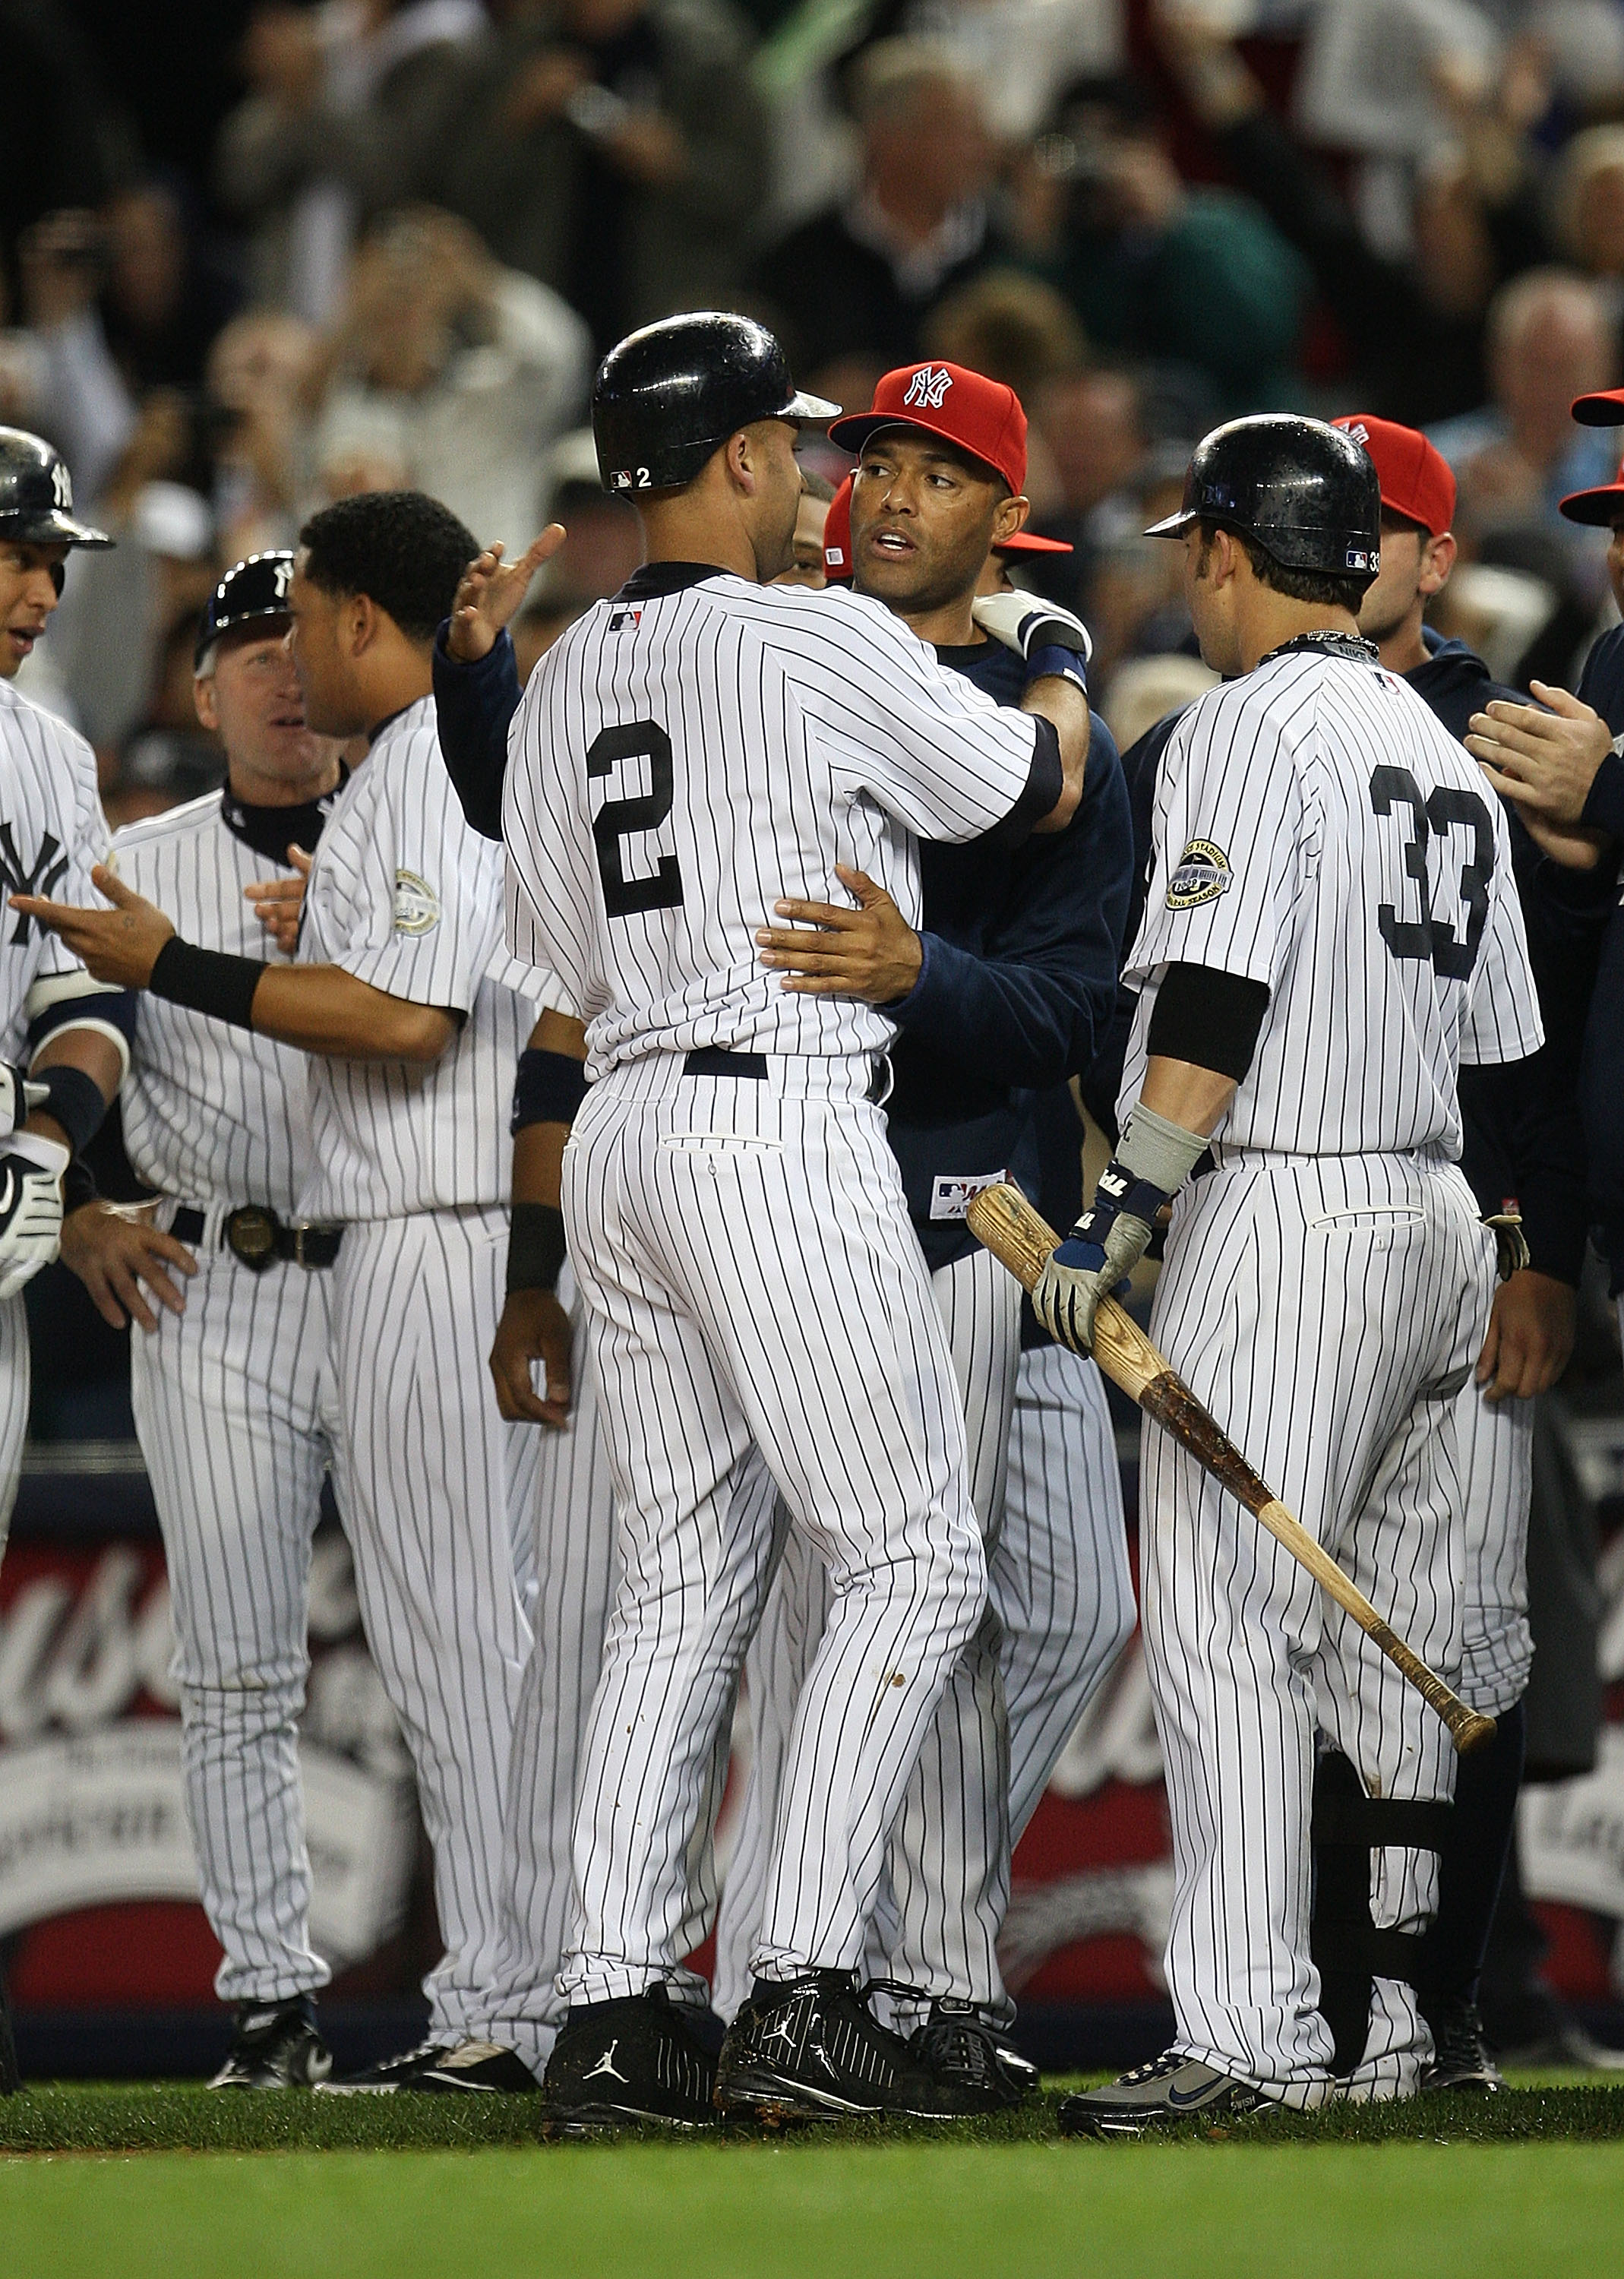 Jorge Posada and the Yankees Struggle to Transition - The New York